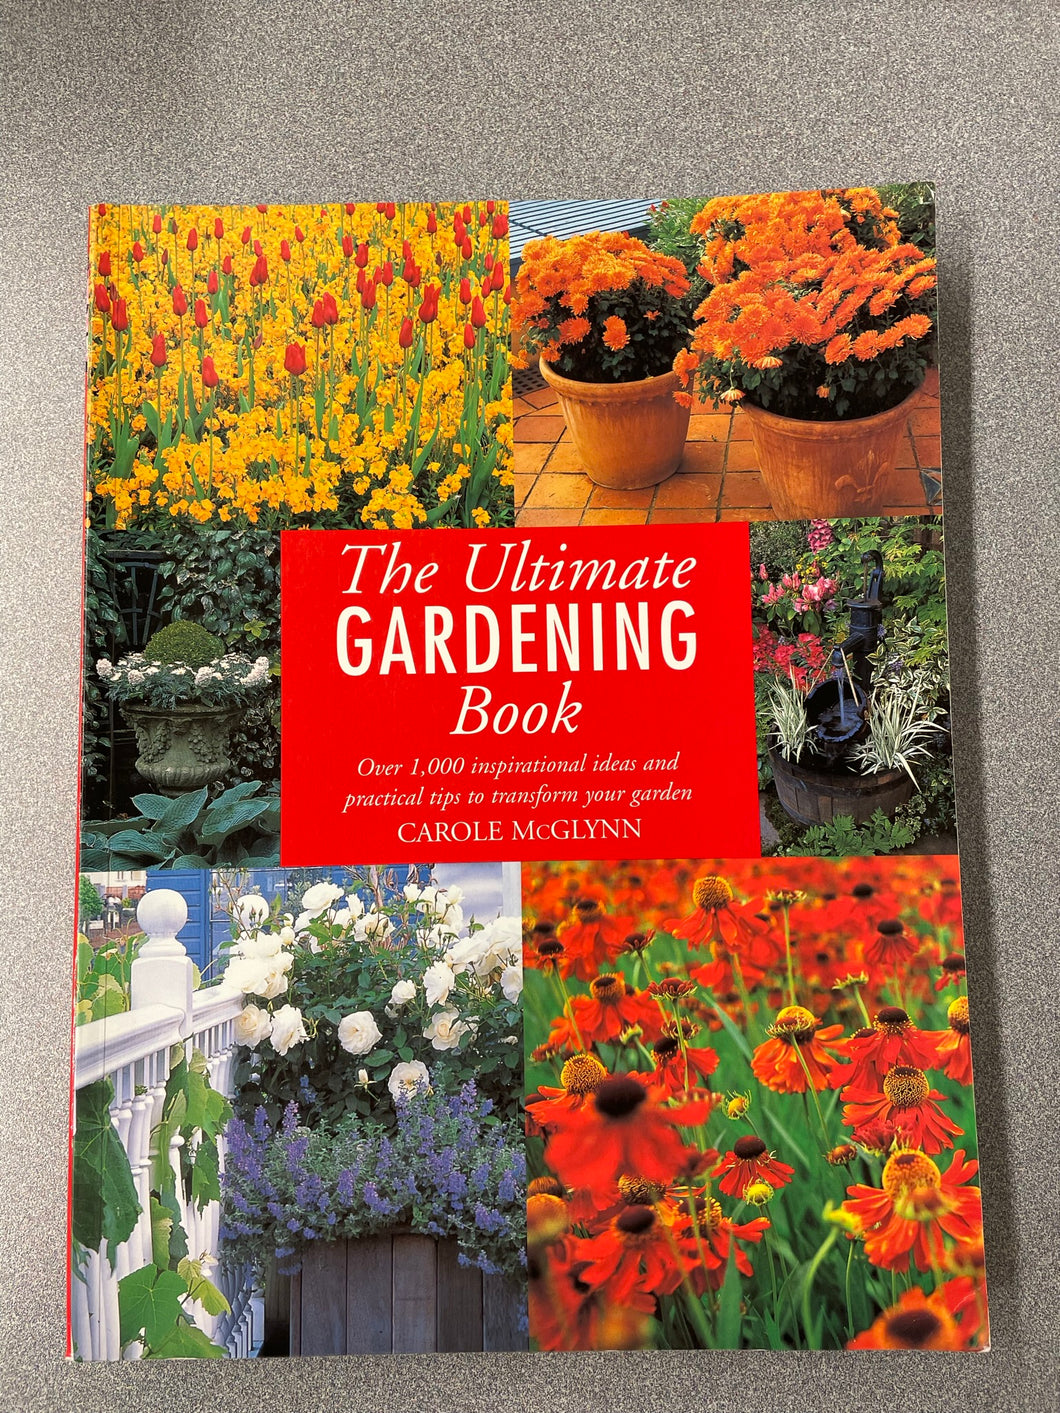 The Ultimate Gardening Book: Over 1,000 Inspirational Ideas and Practical Tips to Transform Your Garden, McGlynn, Carole [1998] G 1/23